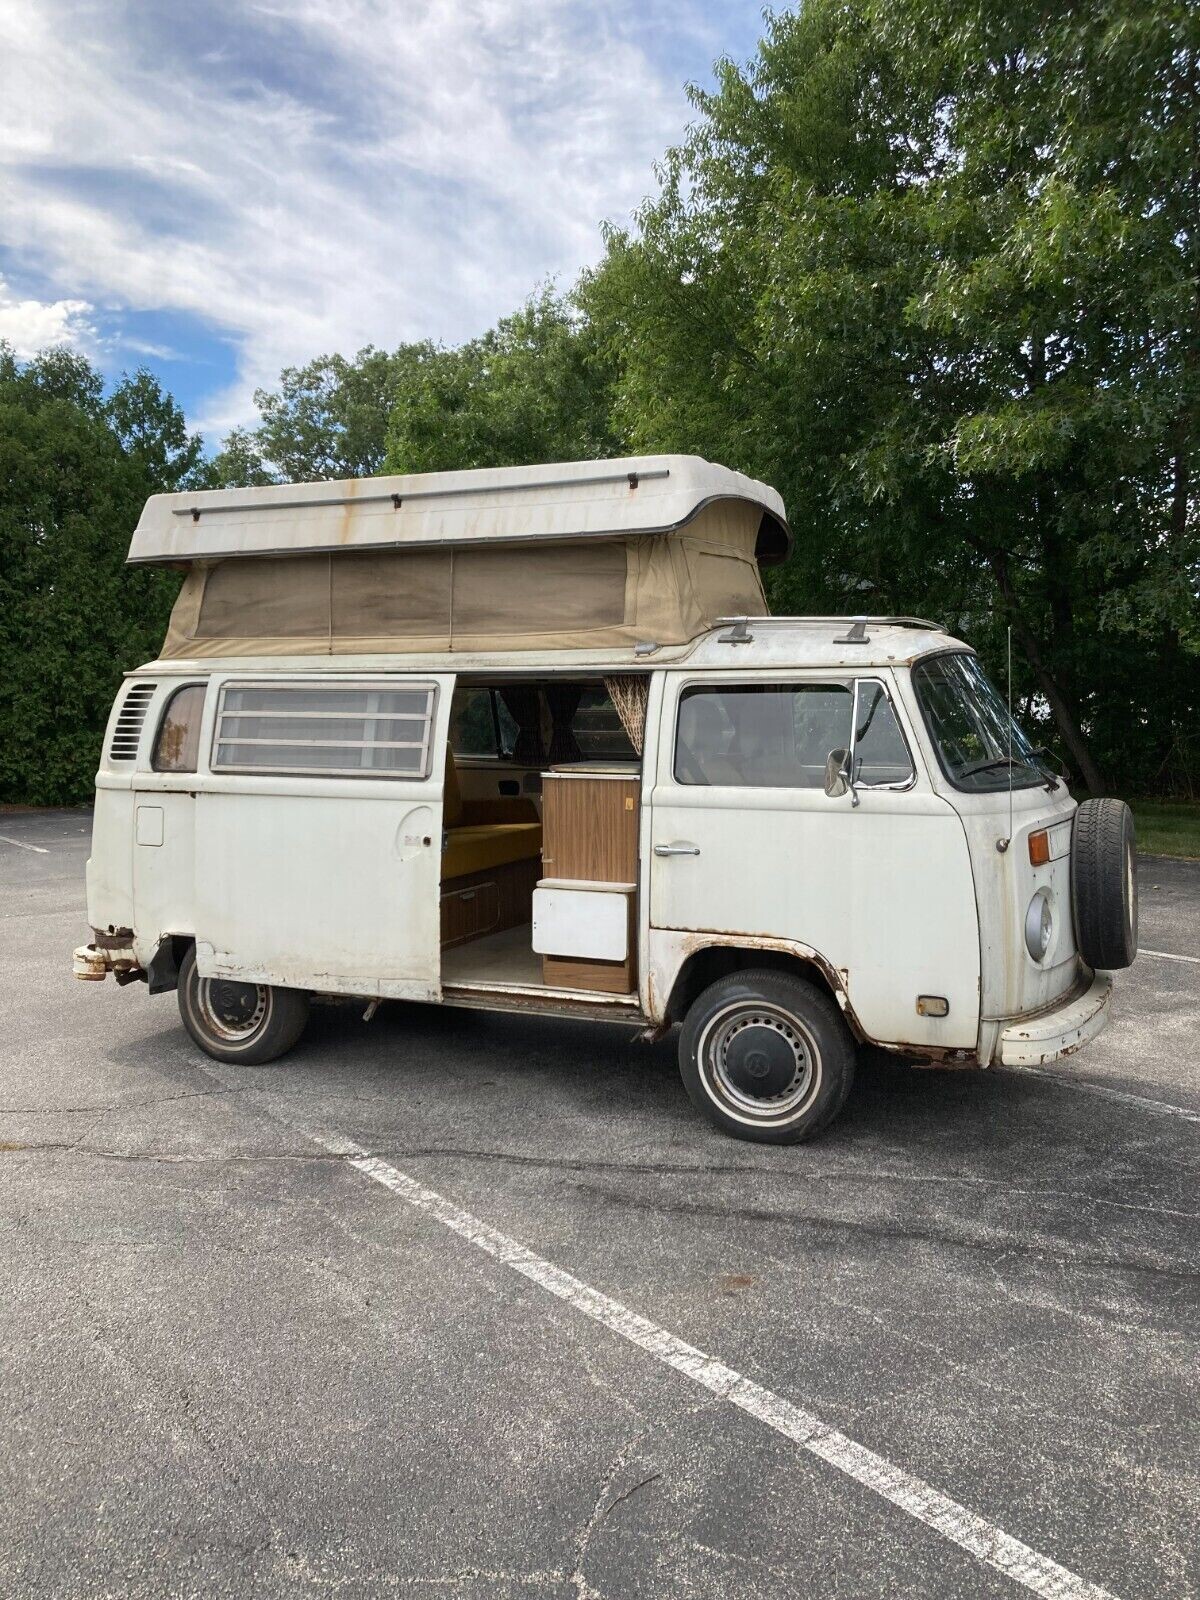 gips Antibiotica Muf Crudded-up Classic: 1973 Volkswagen Bus Camper | Barn Finds